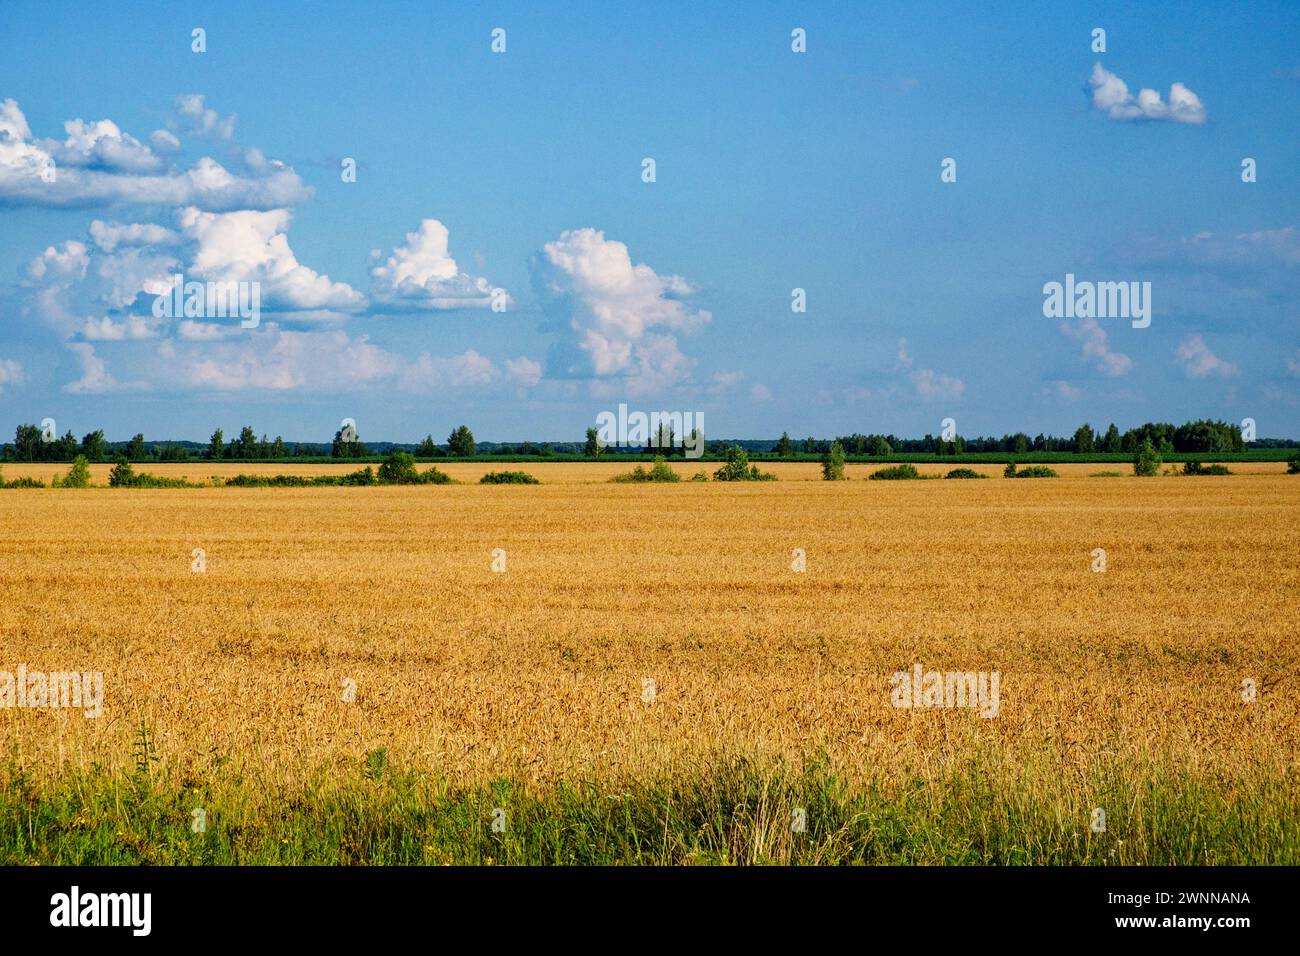 Sunlit wheat field with scattered clouds and distant trees in view. Stock Photo